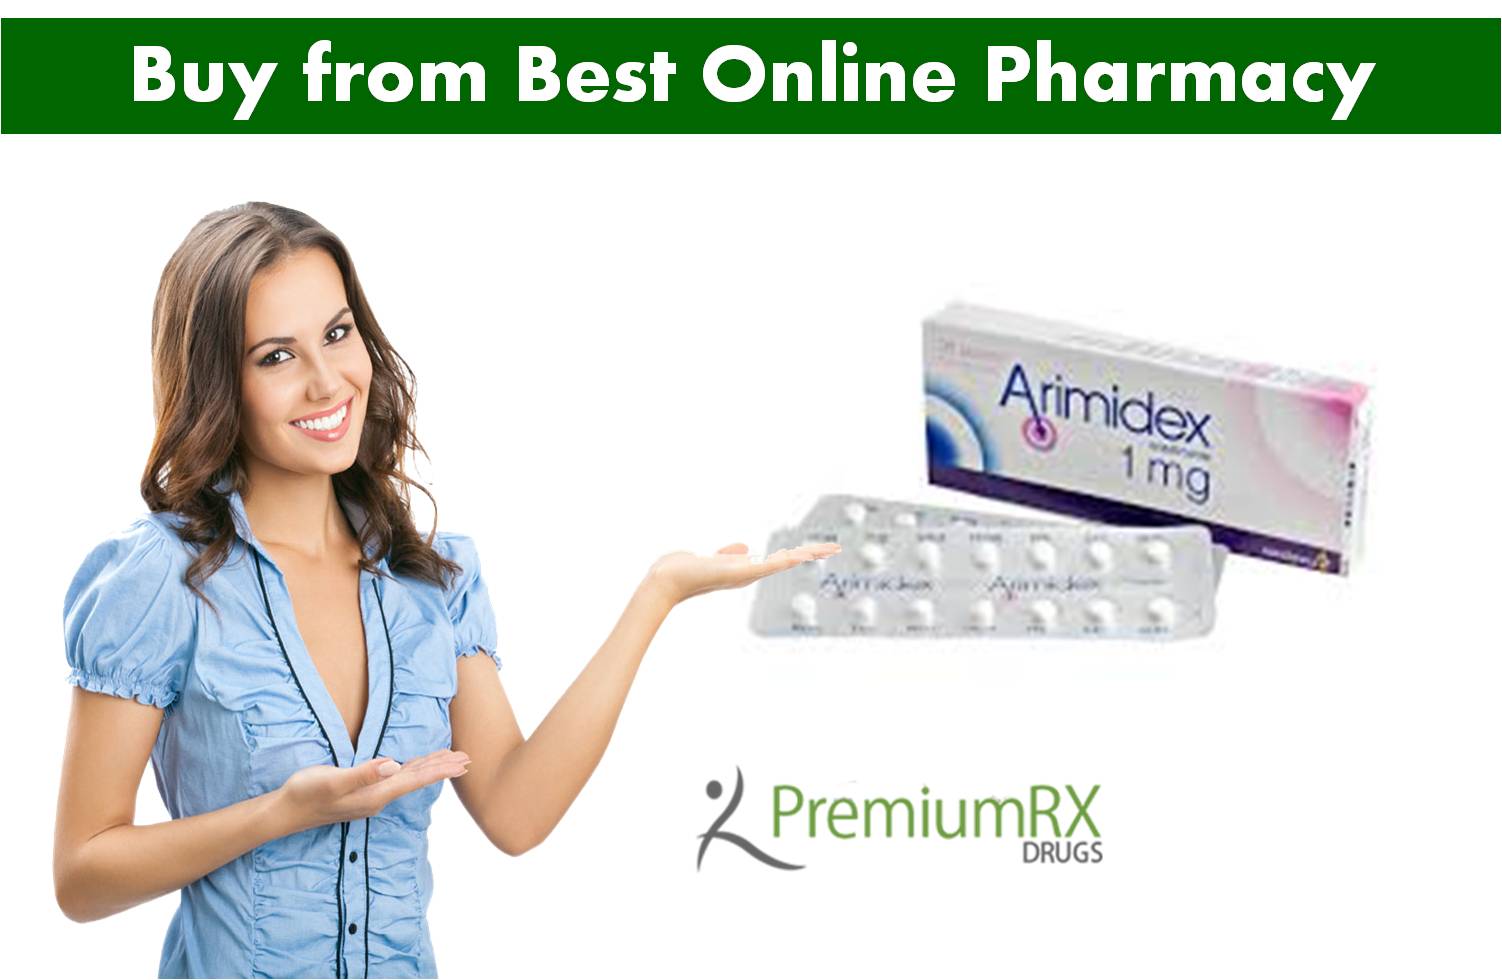 Arimidex 1mg – A Treatment for Breast Cancer